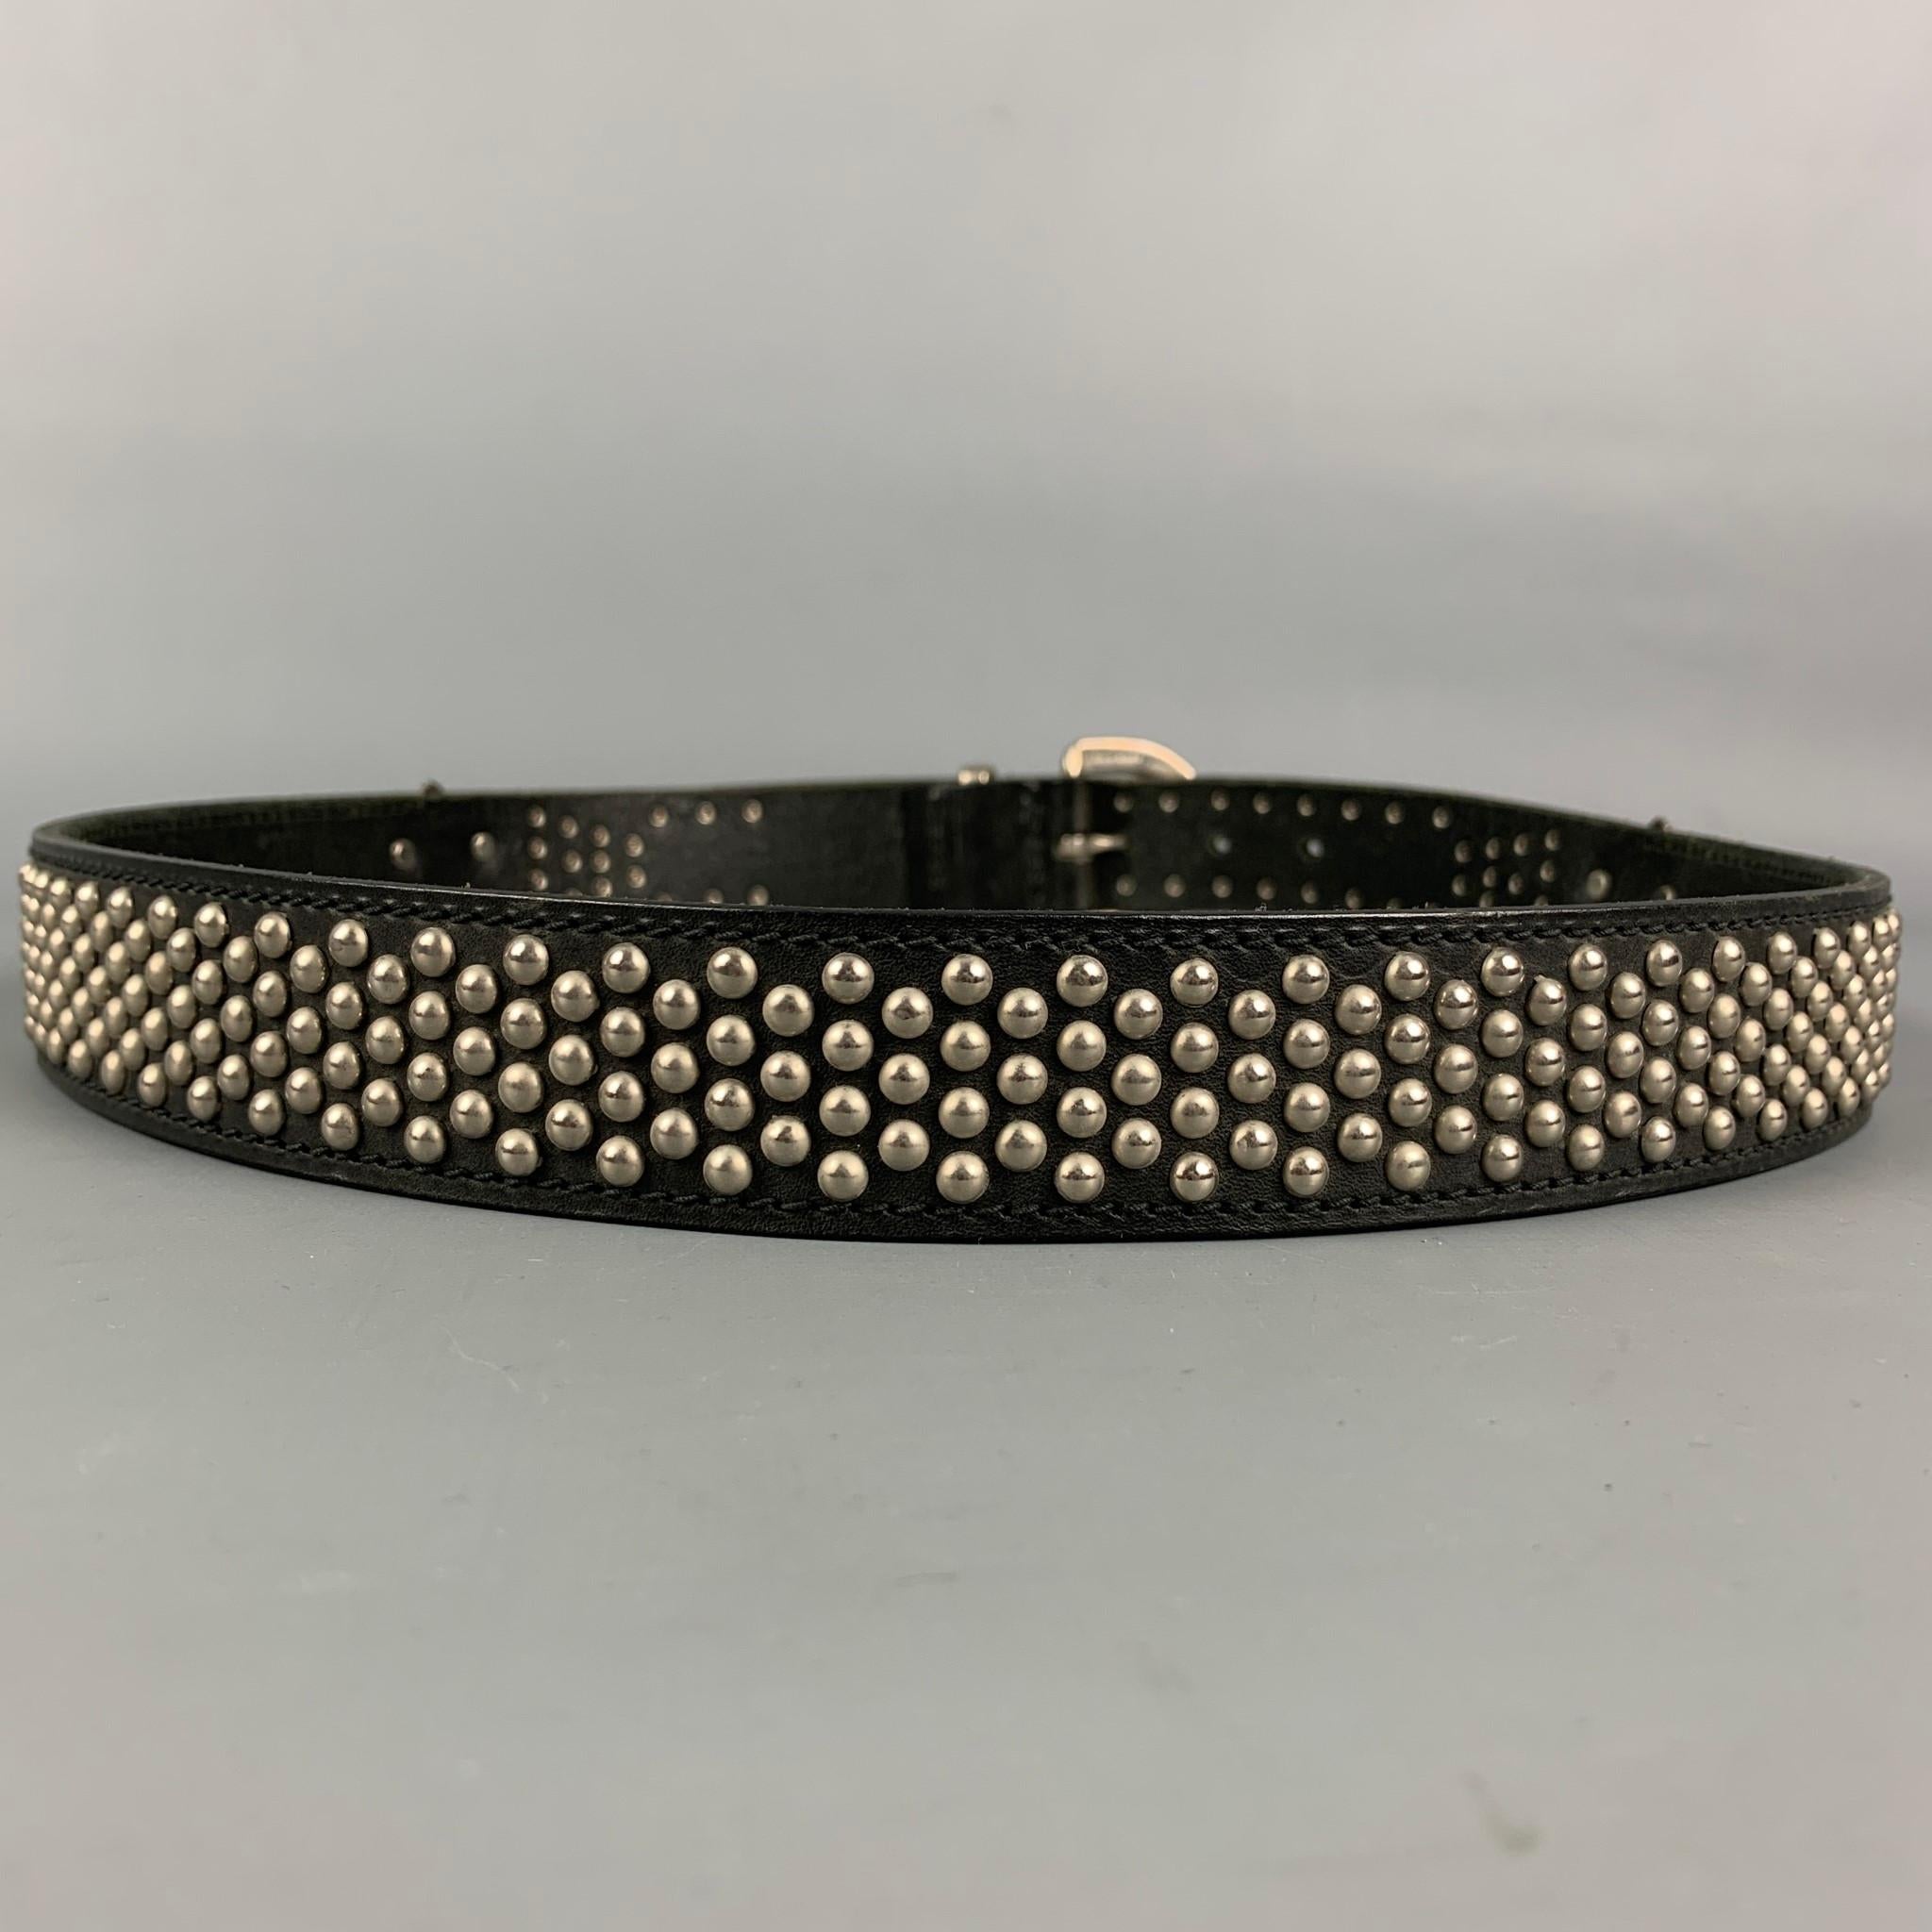 Vintage VERSACE by GIANNI VERSACE belt comes in a black leather with a studded design throughout featuring lion head details and a buckle closure. Made in Italy.

Good Pre-Owned Condition.
Marked: 95/38

Length: 44.5 in.
Width: 1.25 in.
Fits: 35 in.